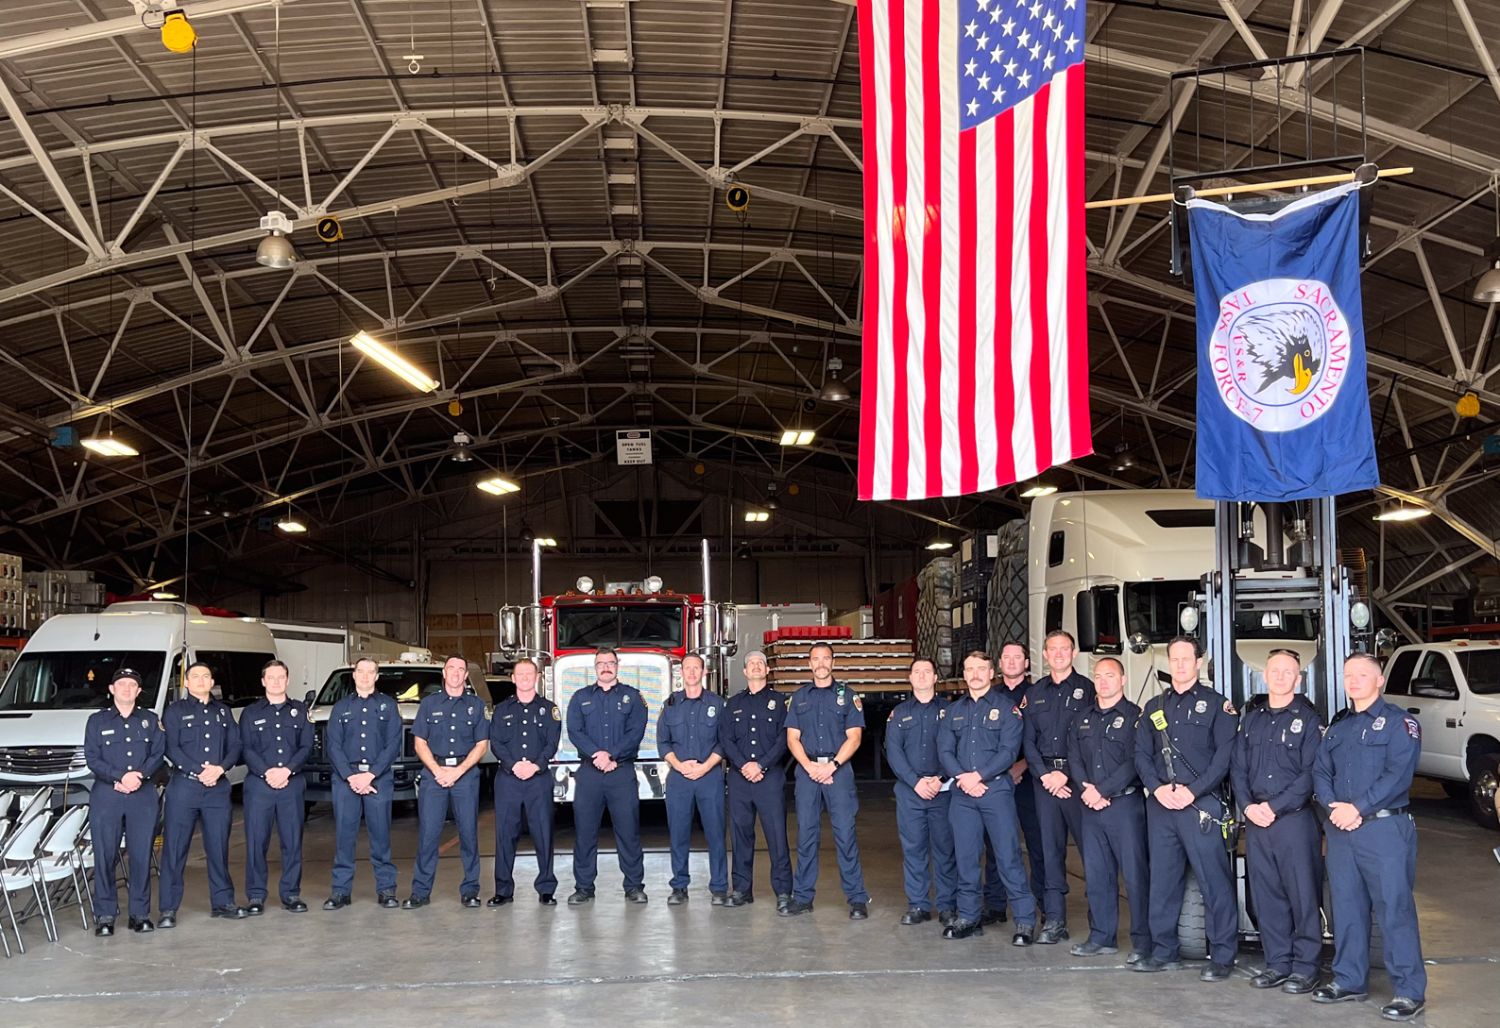 a group of firefighters standing in line with two flags over them.